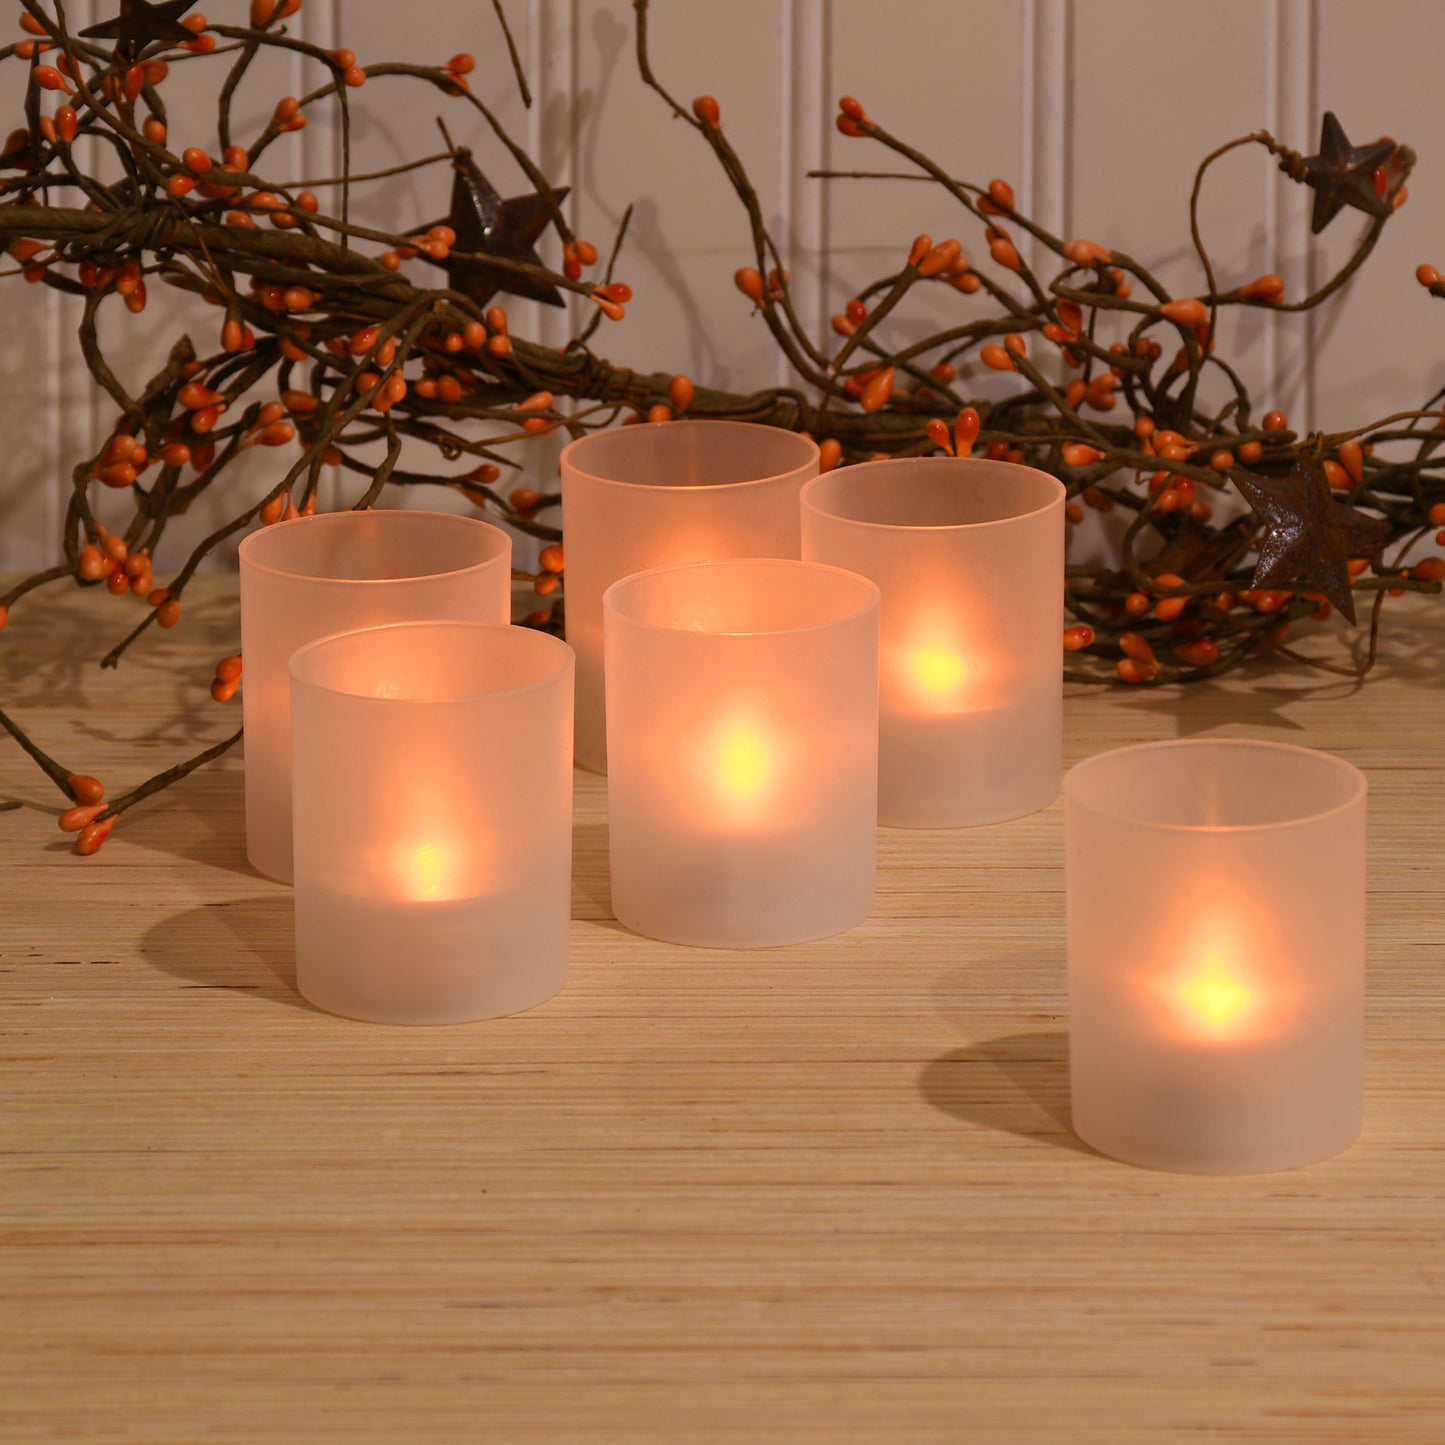 Frosted Votives with Battery Operated LED Lights - Set of 6 - Orange